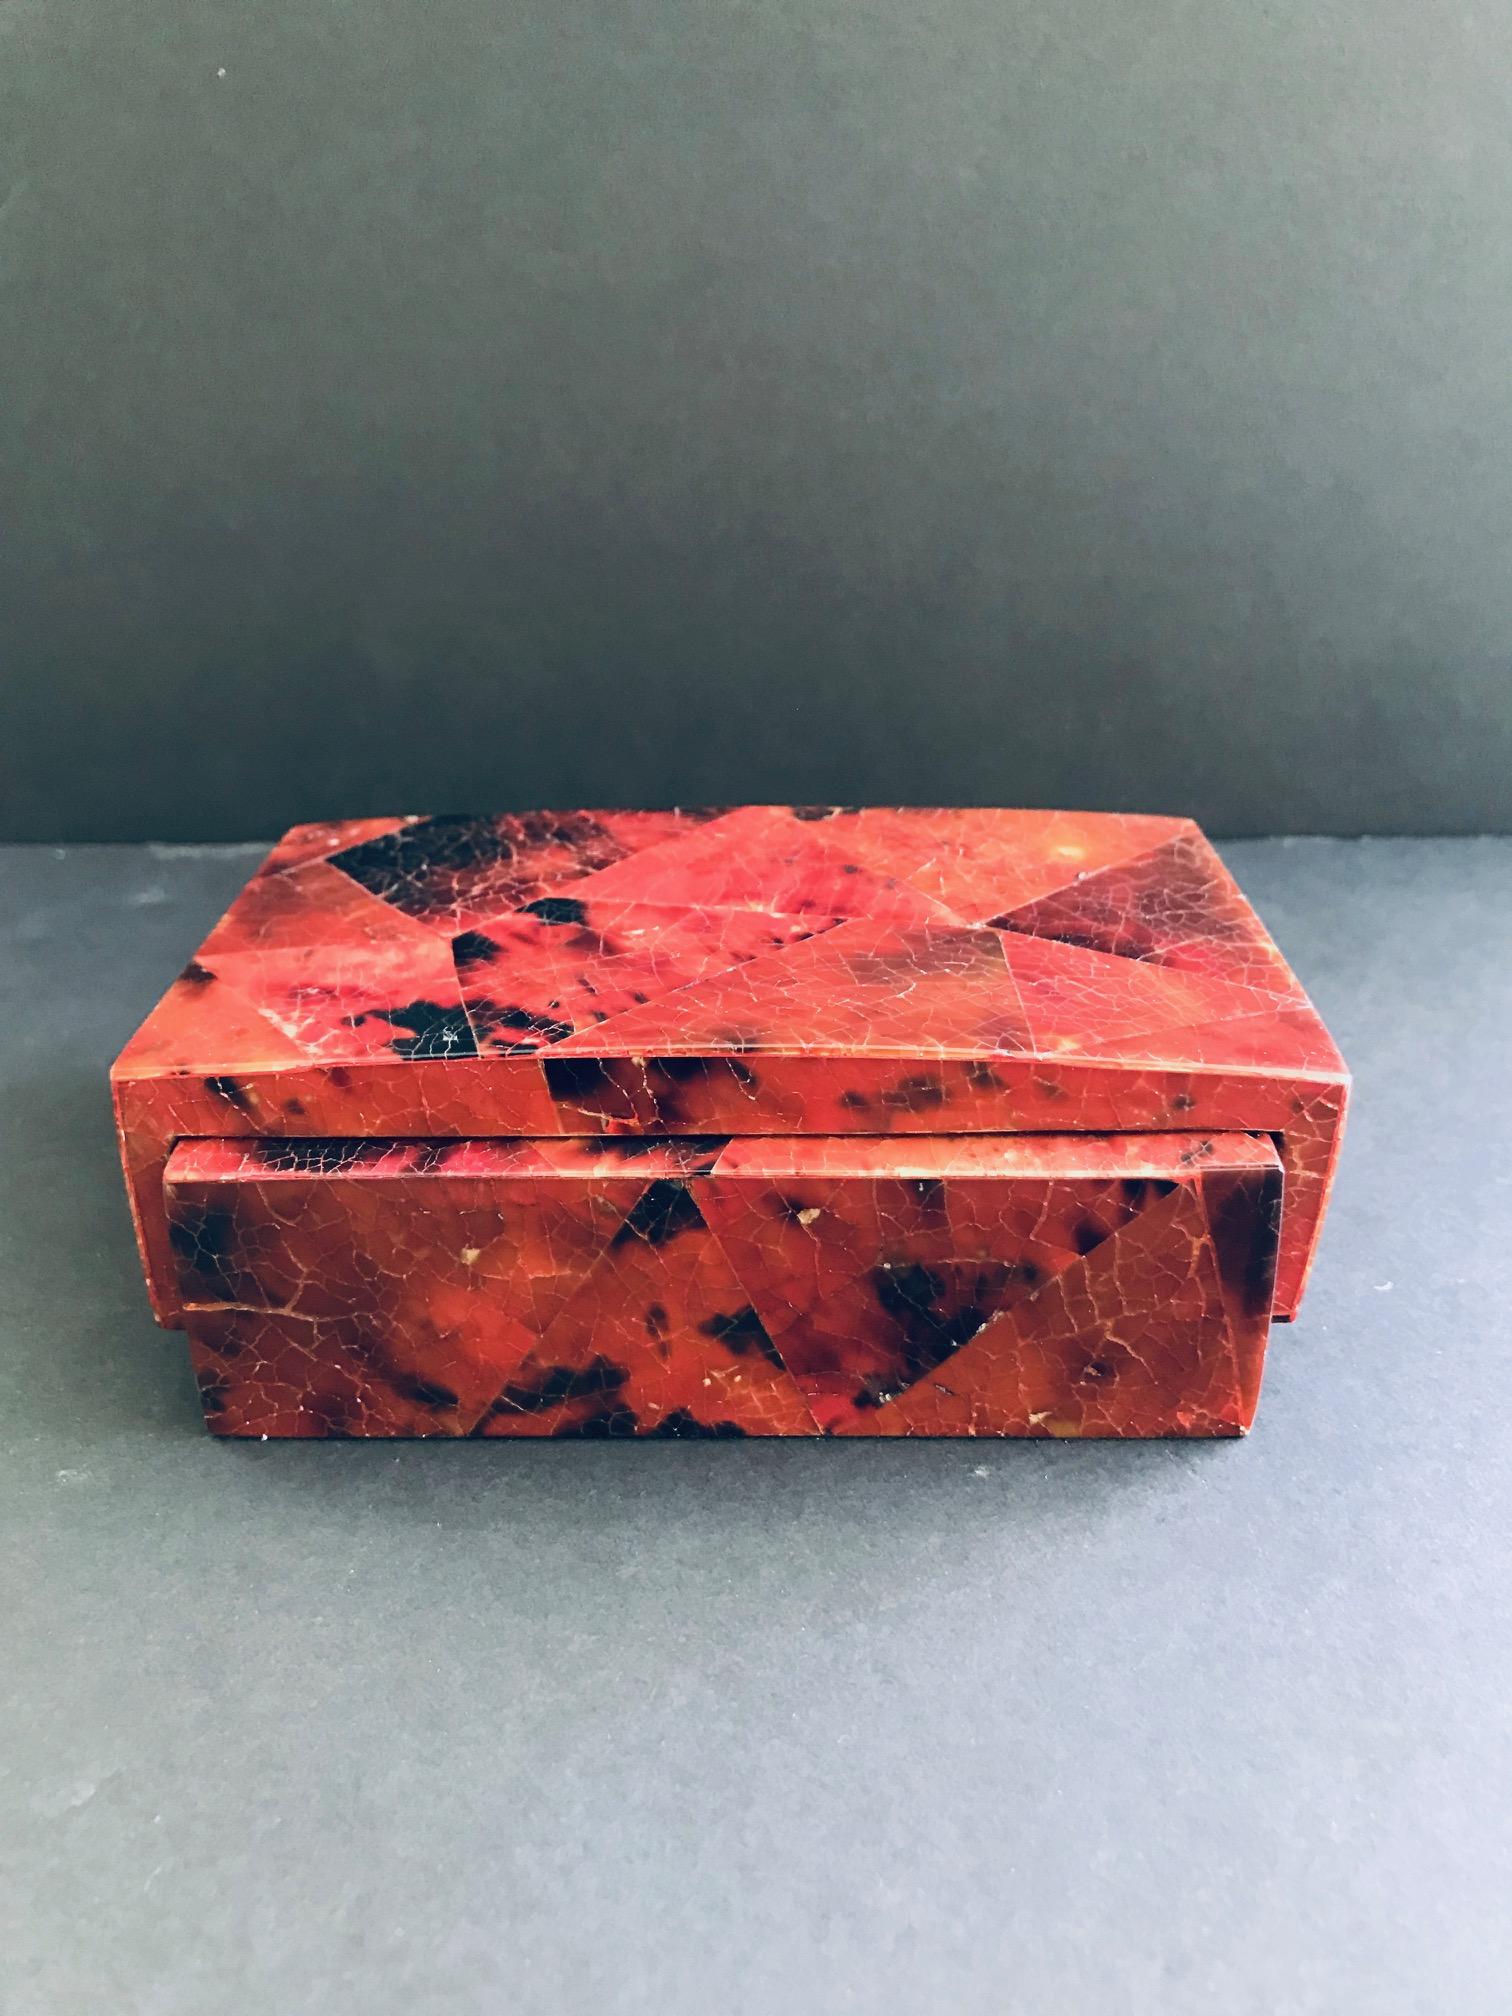 Organic Modern box or desk accessory in lacquered pen-shell. Hand-dyed in red and black with mosaic inlays throughout. Box features overlapping waterfall lid design with handcrafted palmwood interior. Signed R&Y Augousti on underside. Other matching